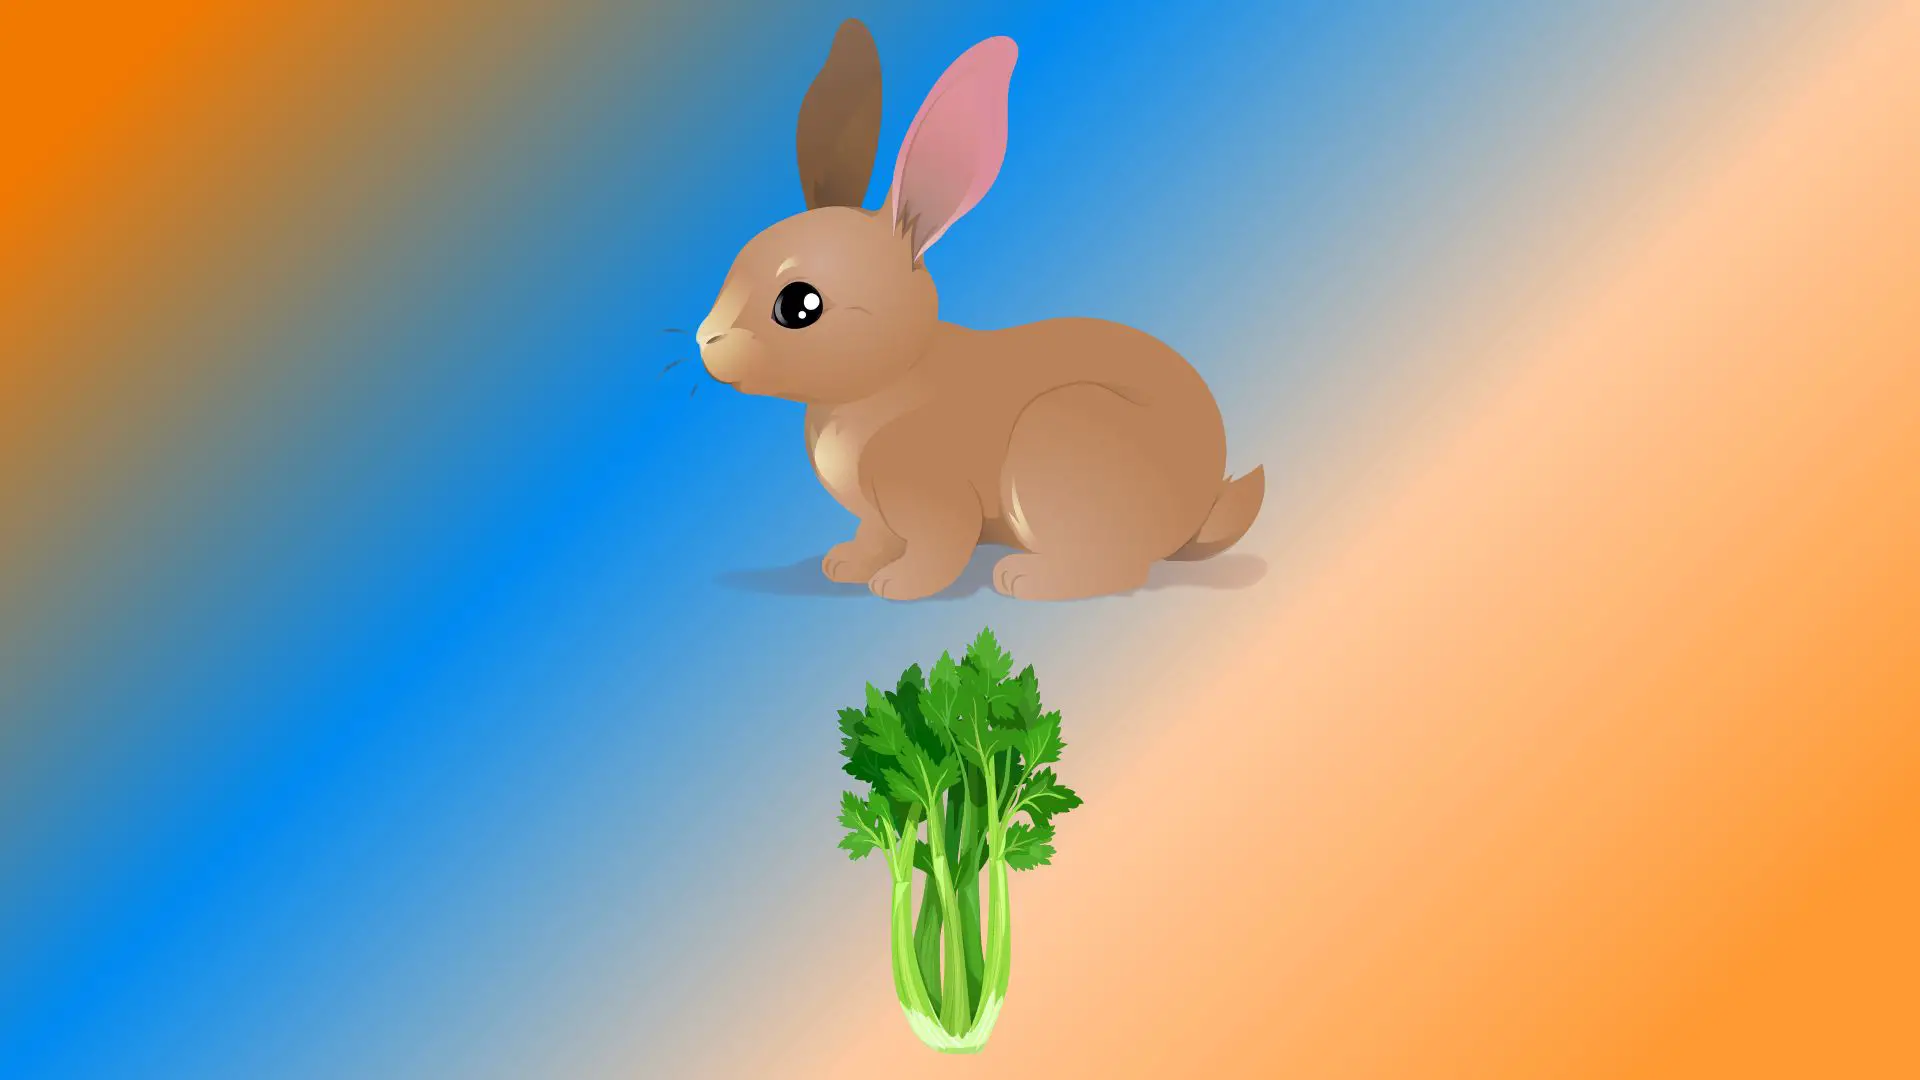 Can Rabbits Eat Celery? What About Celery Leaves?